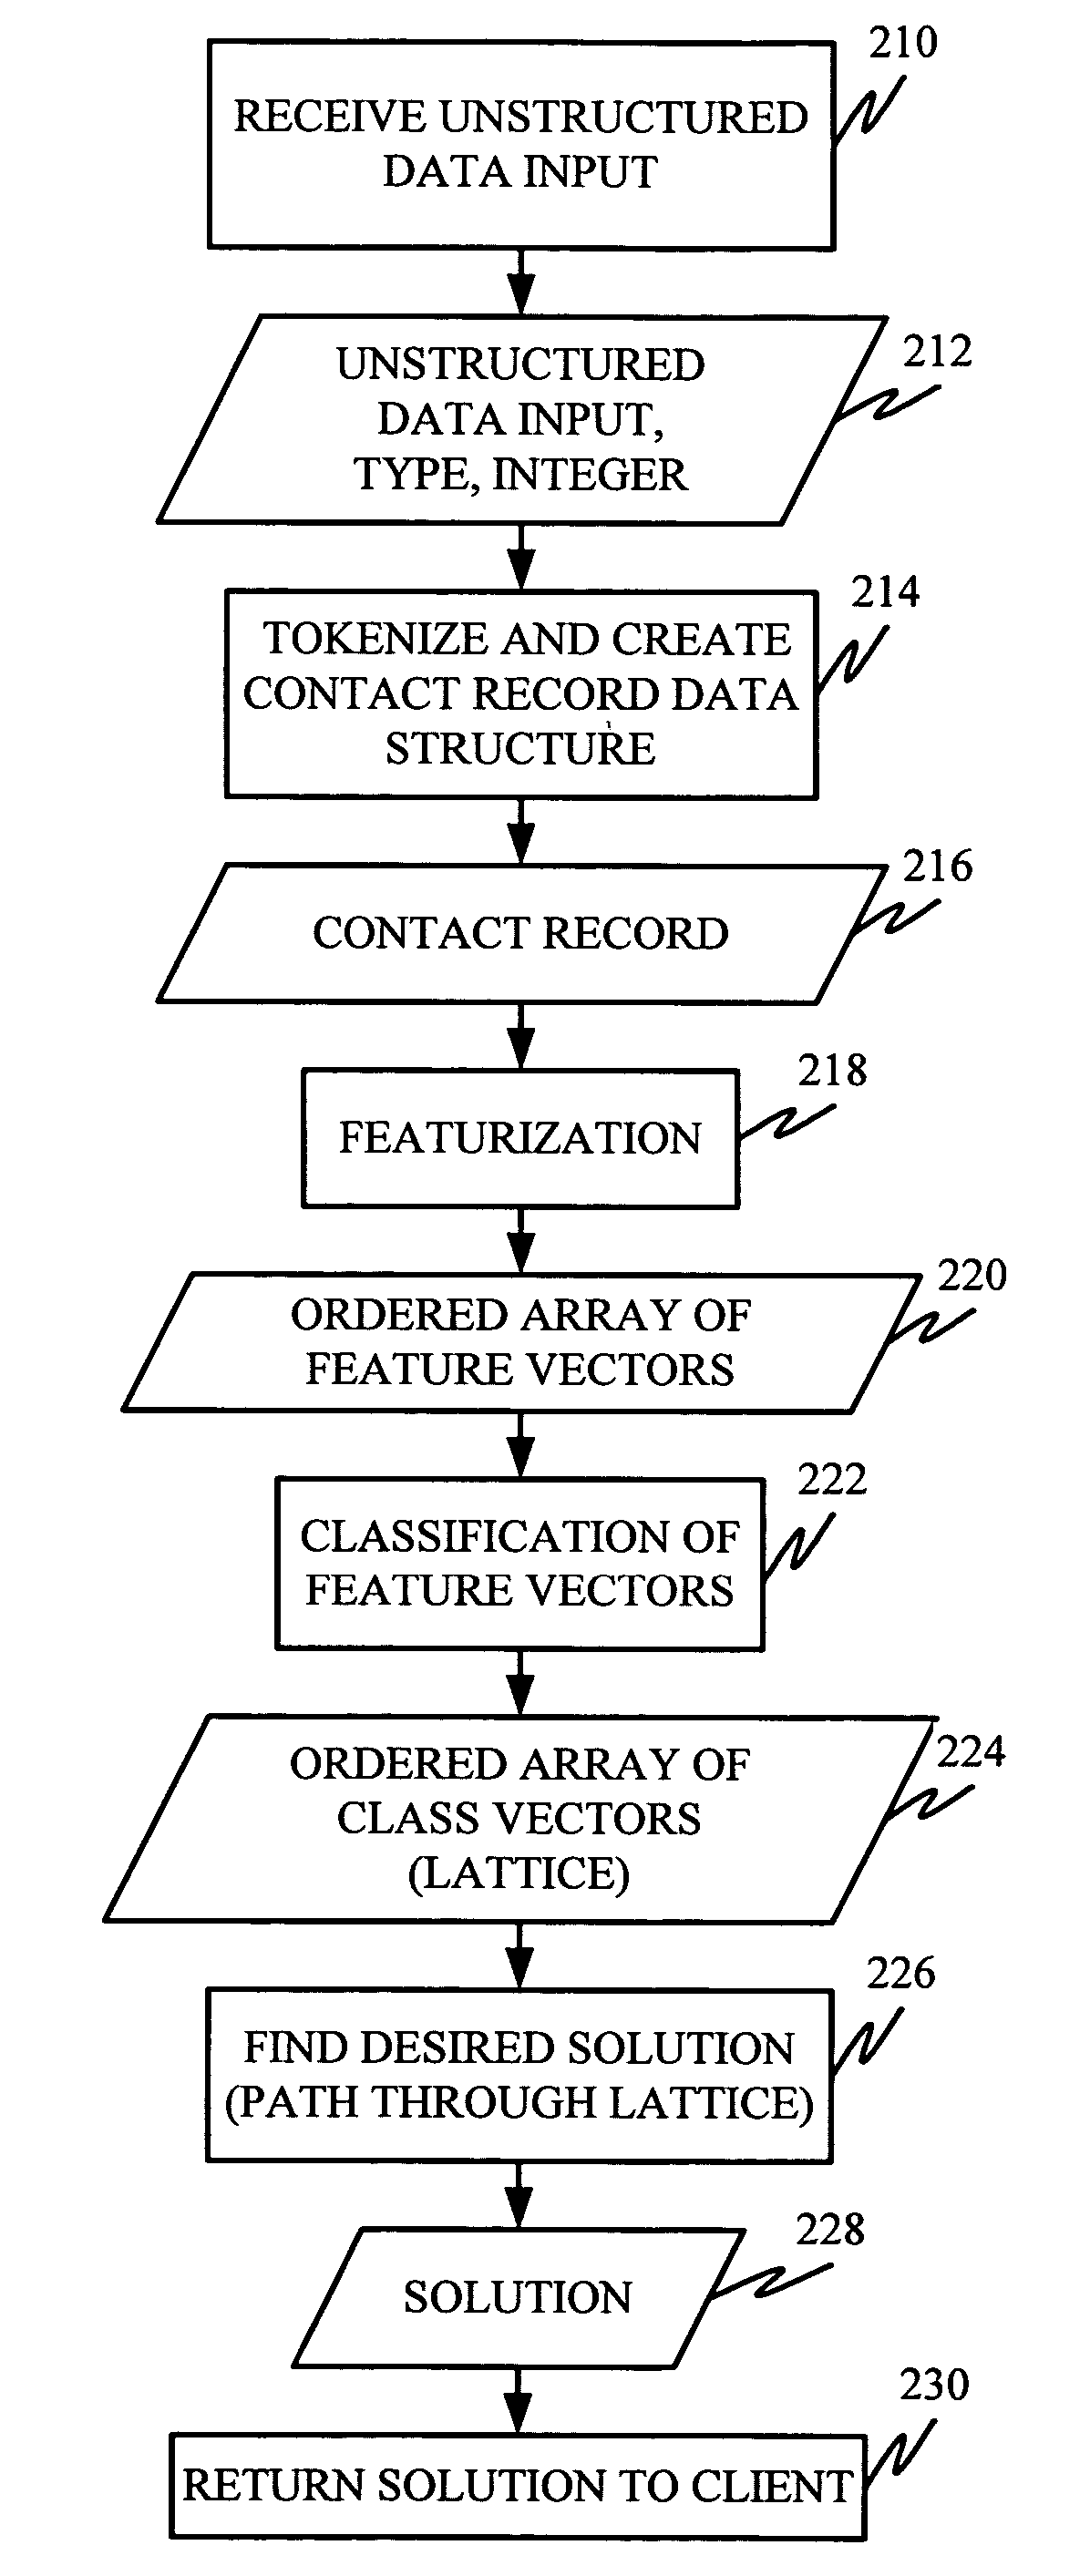 System and method for parsing unstructured data into structured data